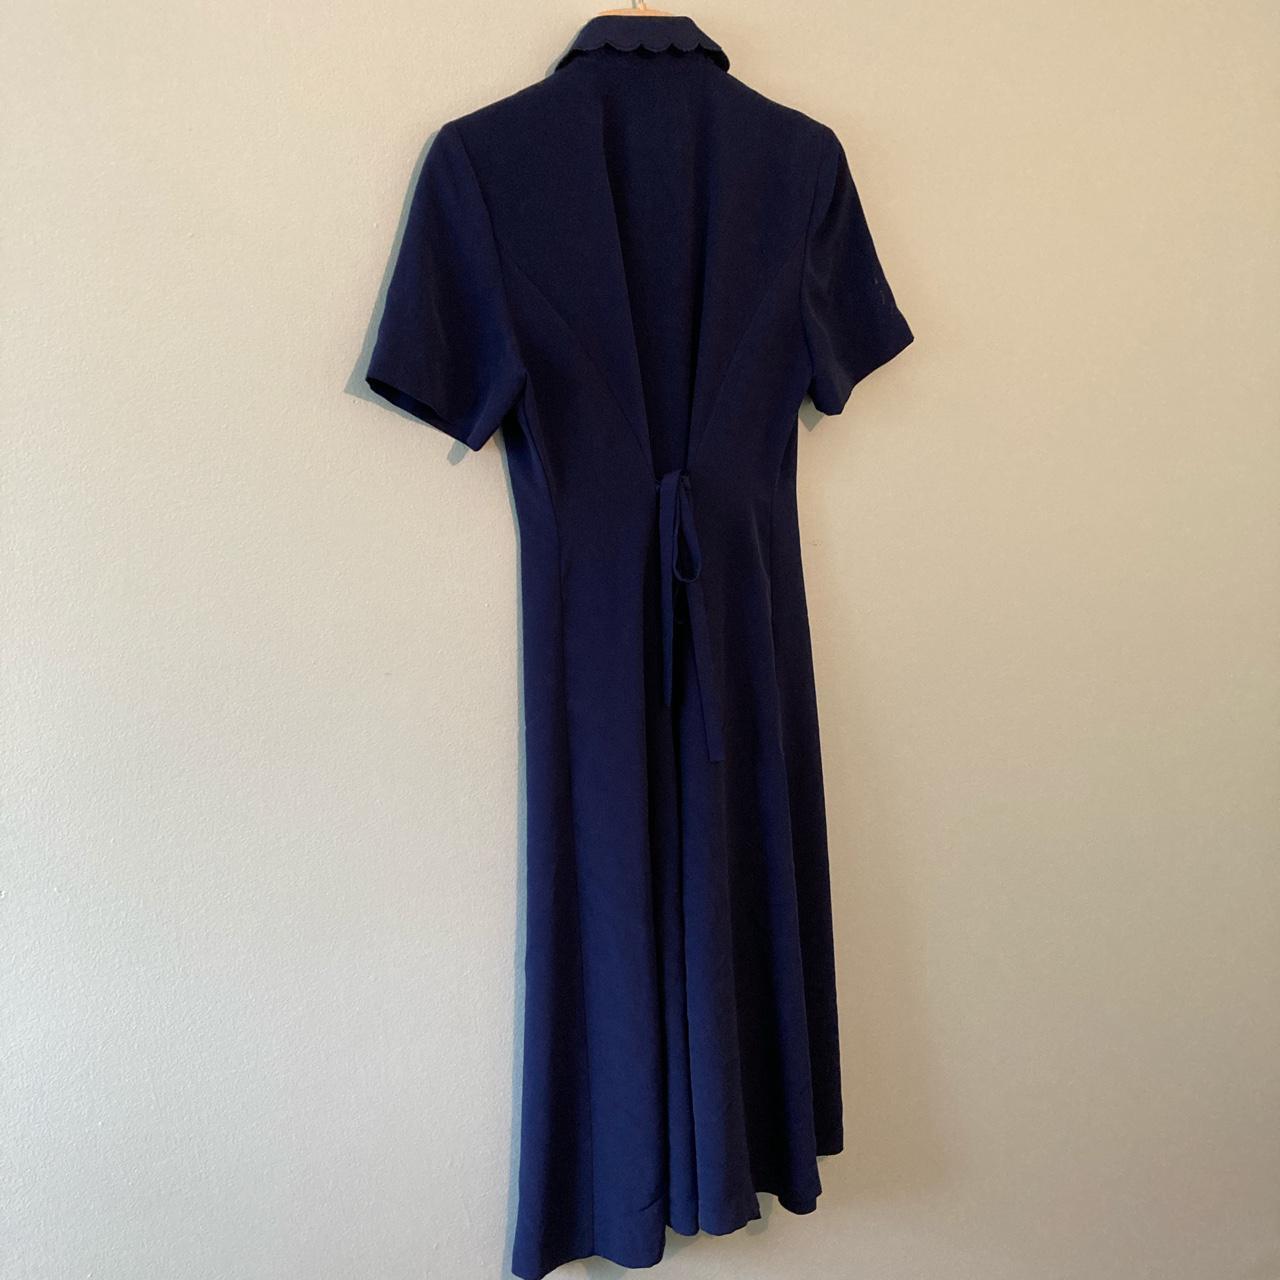 Product Image 2 - vintage 90’s navy blue long